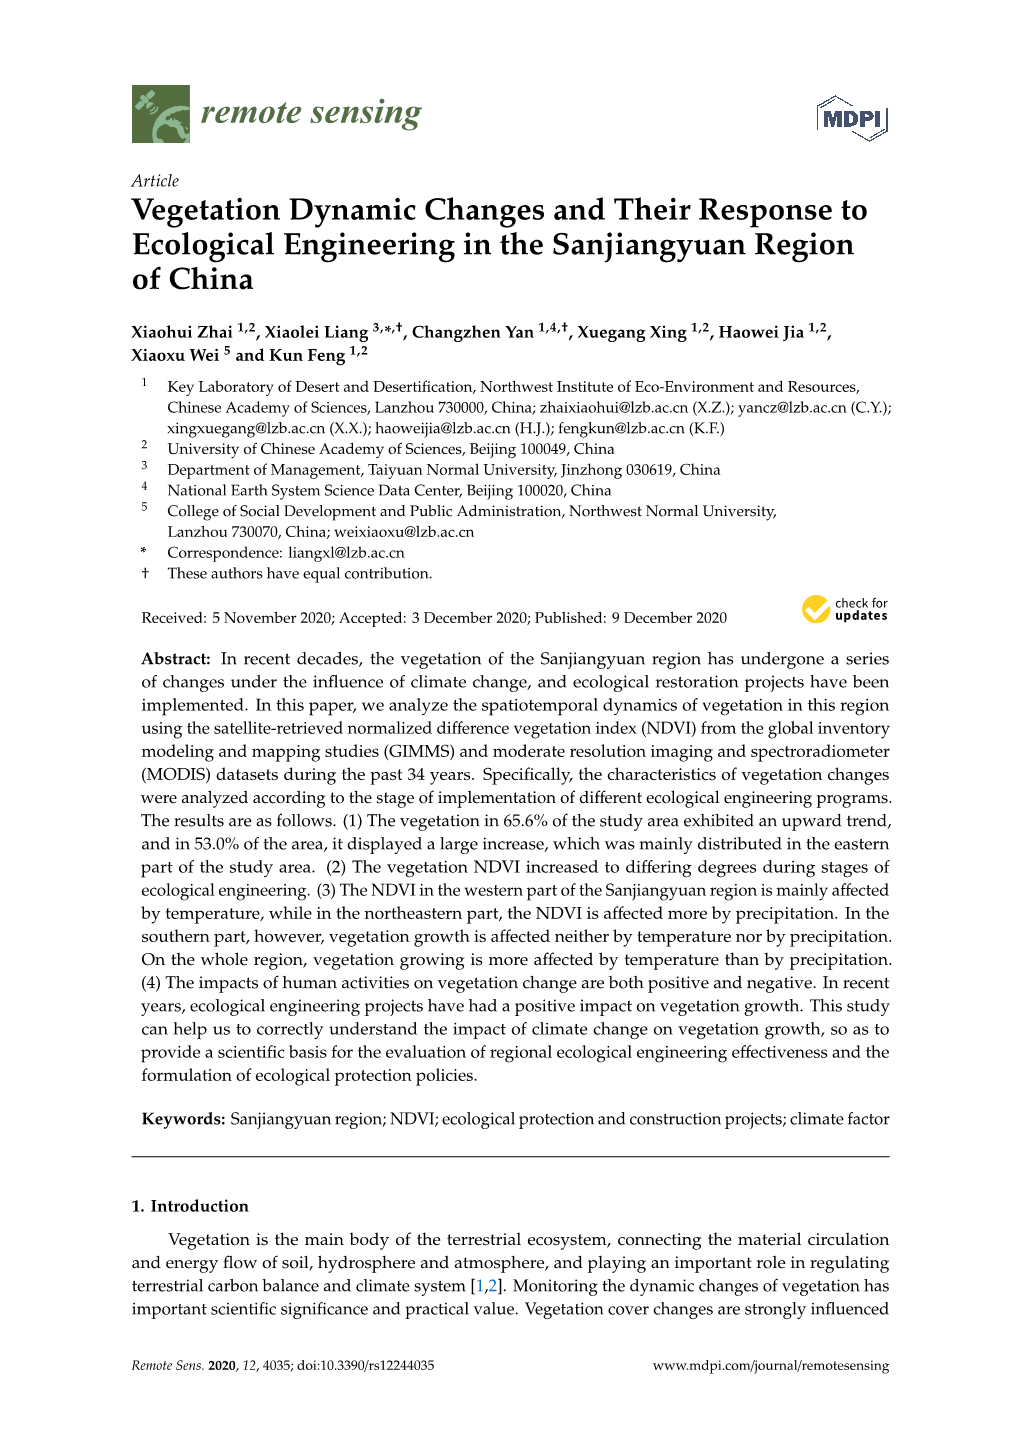 Vegetation Dynamic Changes and Their Response to Ecological Engineering in the Sanjiangyuan Region of China